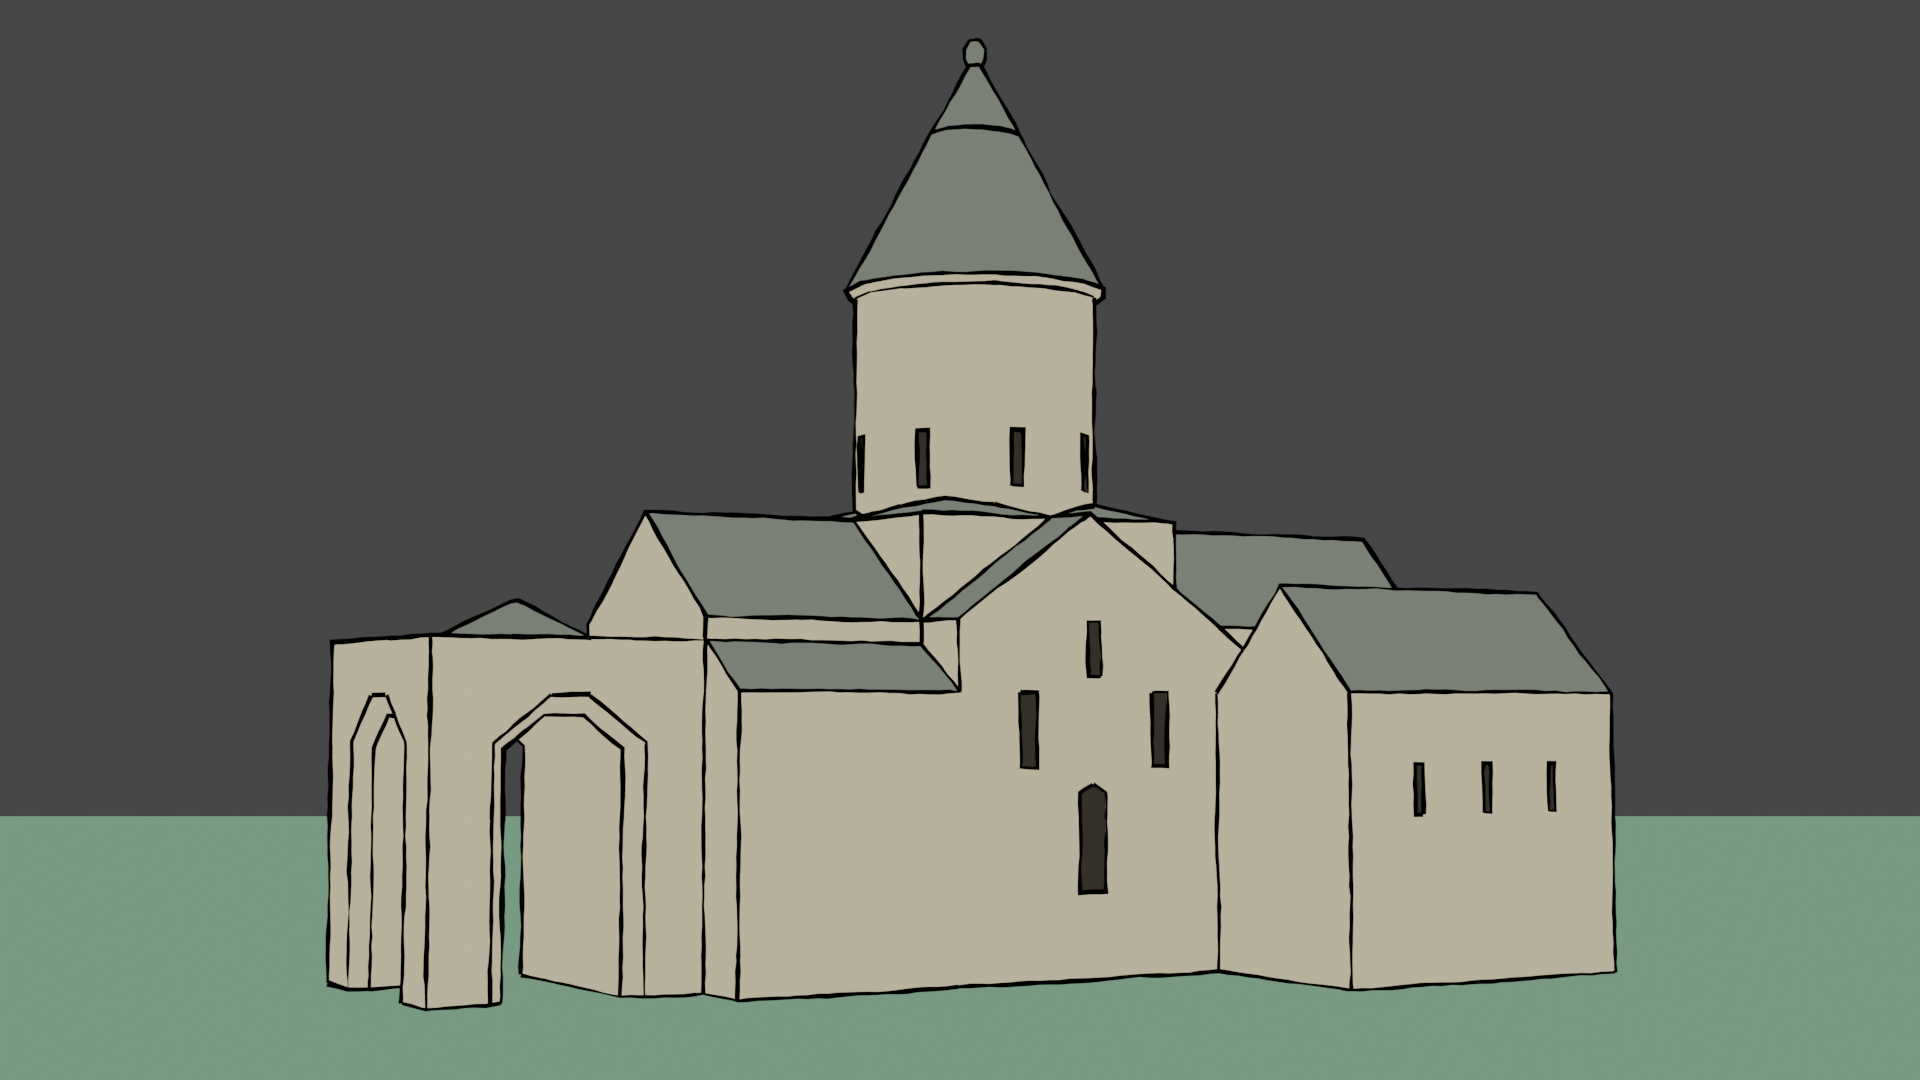 A cel-shaded 3D render of a monastery building